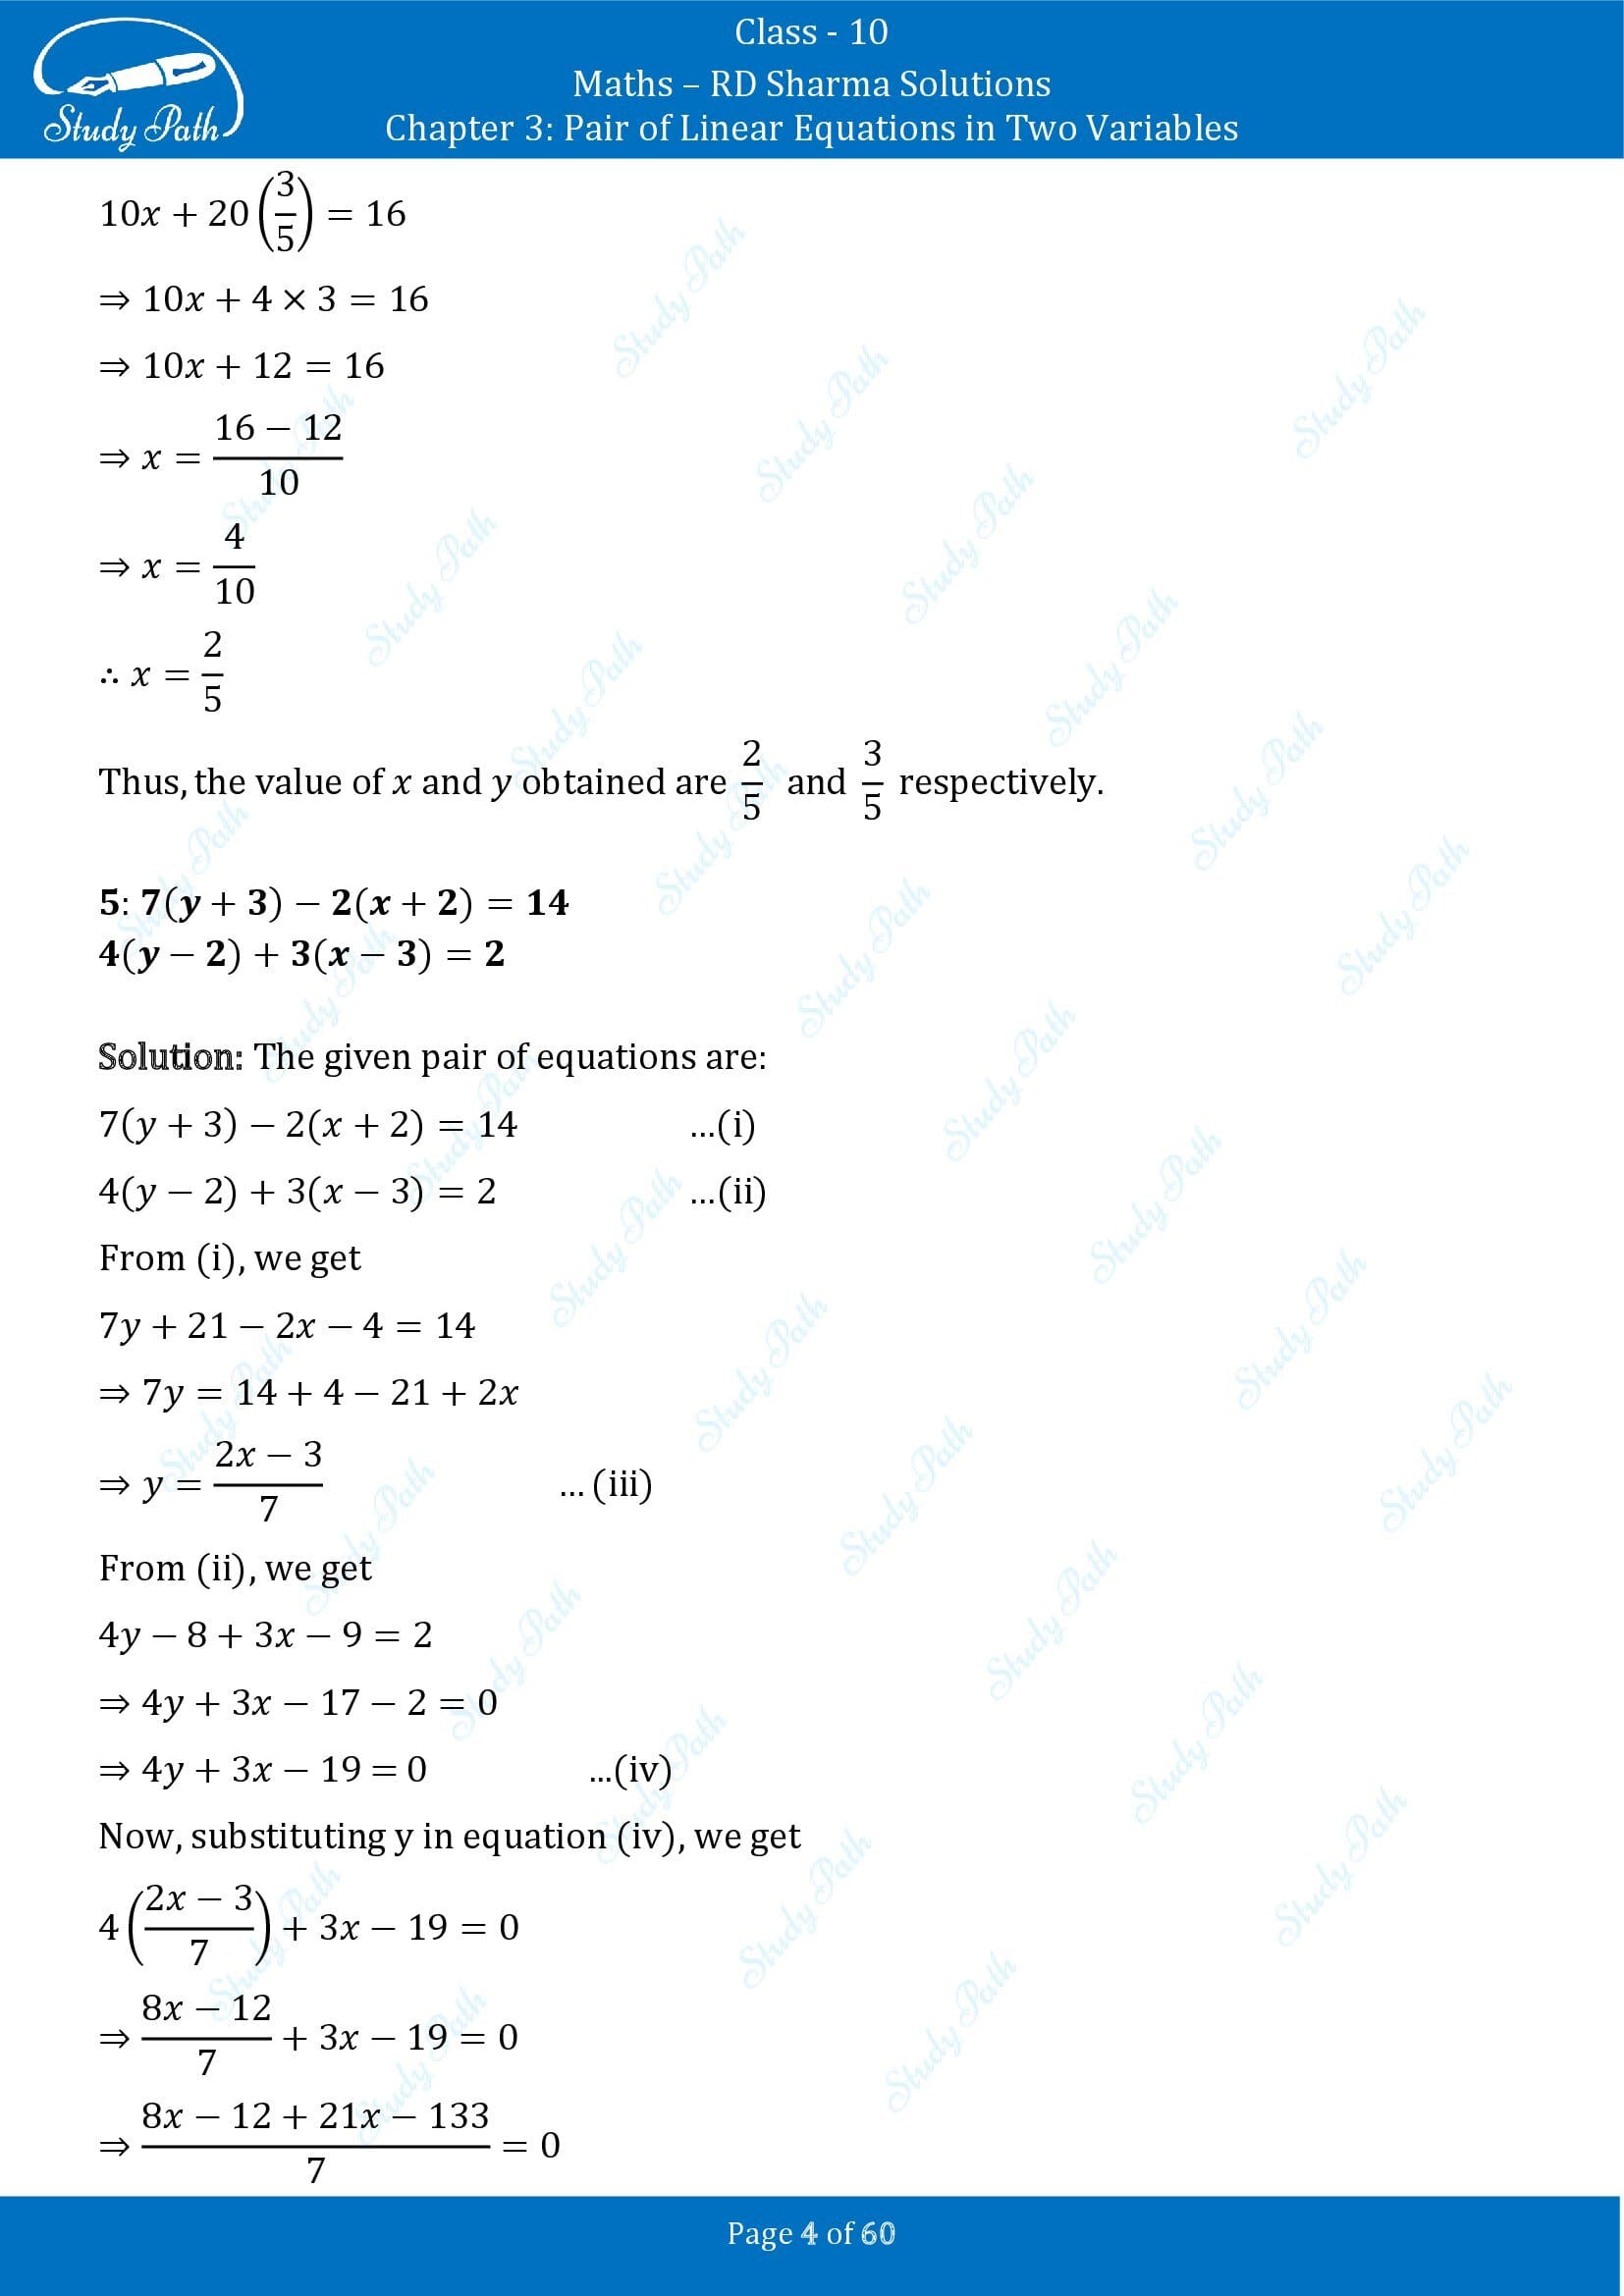 RD Sharma Solutions Class 10 Chapter 3 Pair of Linear Equations in Two Variables Exercise 3.3 00004